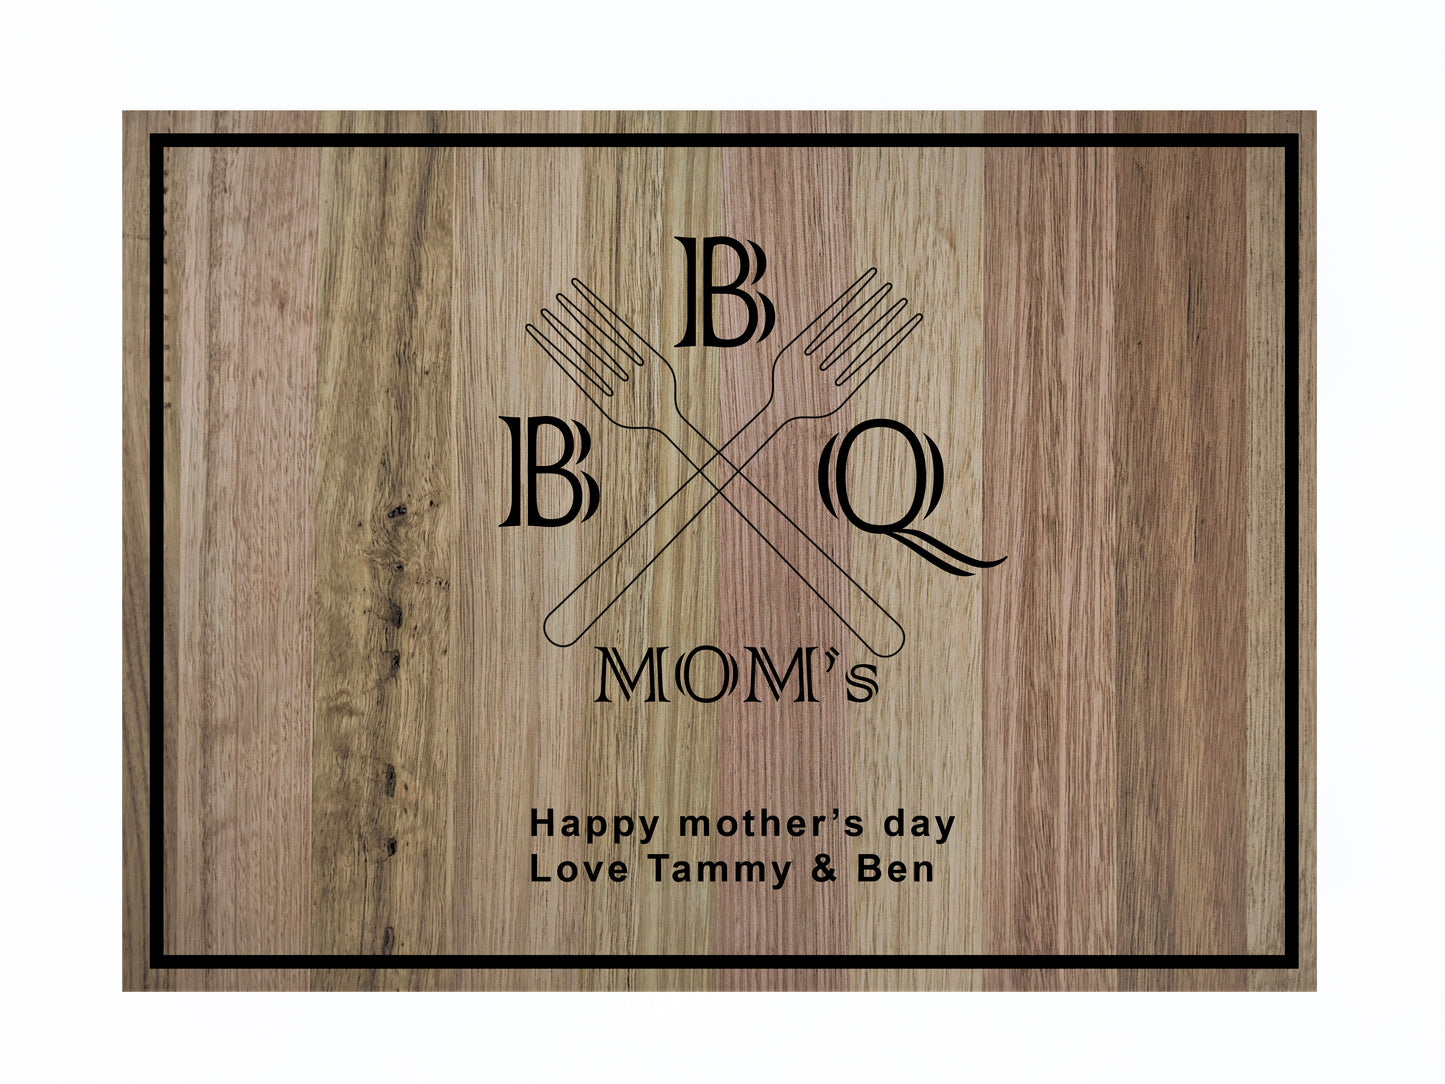 Mother’s Day Cutting Boards